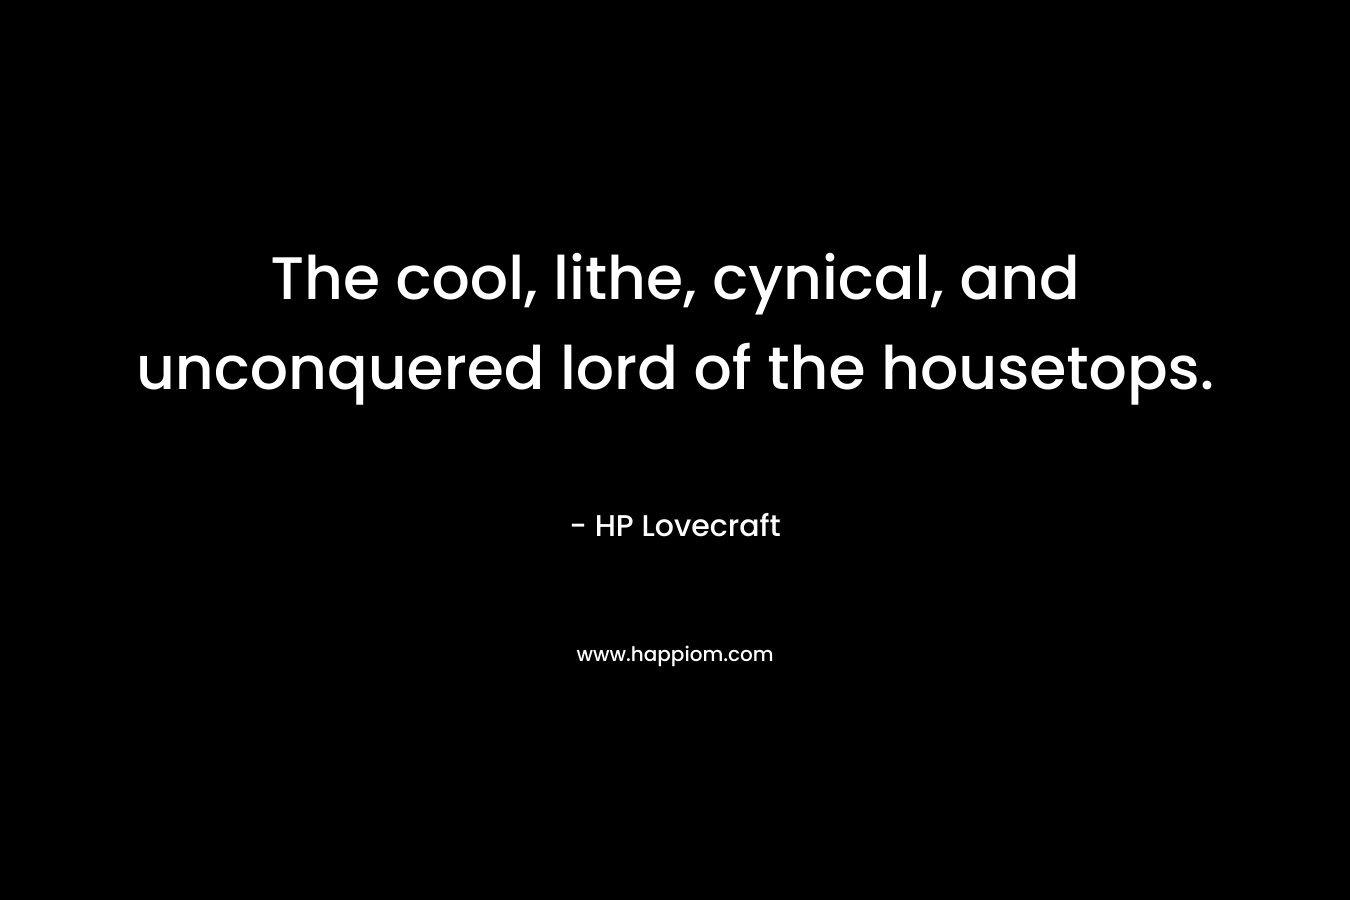 The cool, lithe, cynical, and unconquered lord of the housetops. – HP Lovecraft